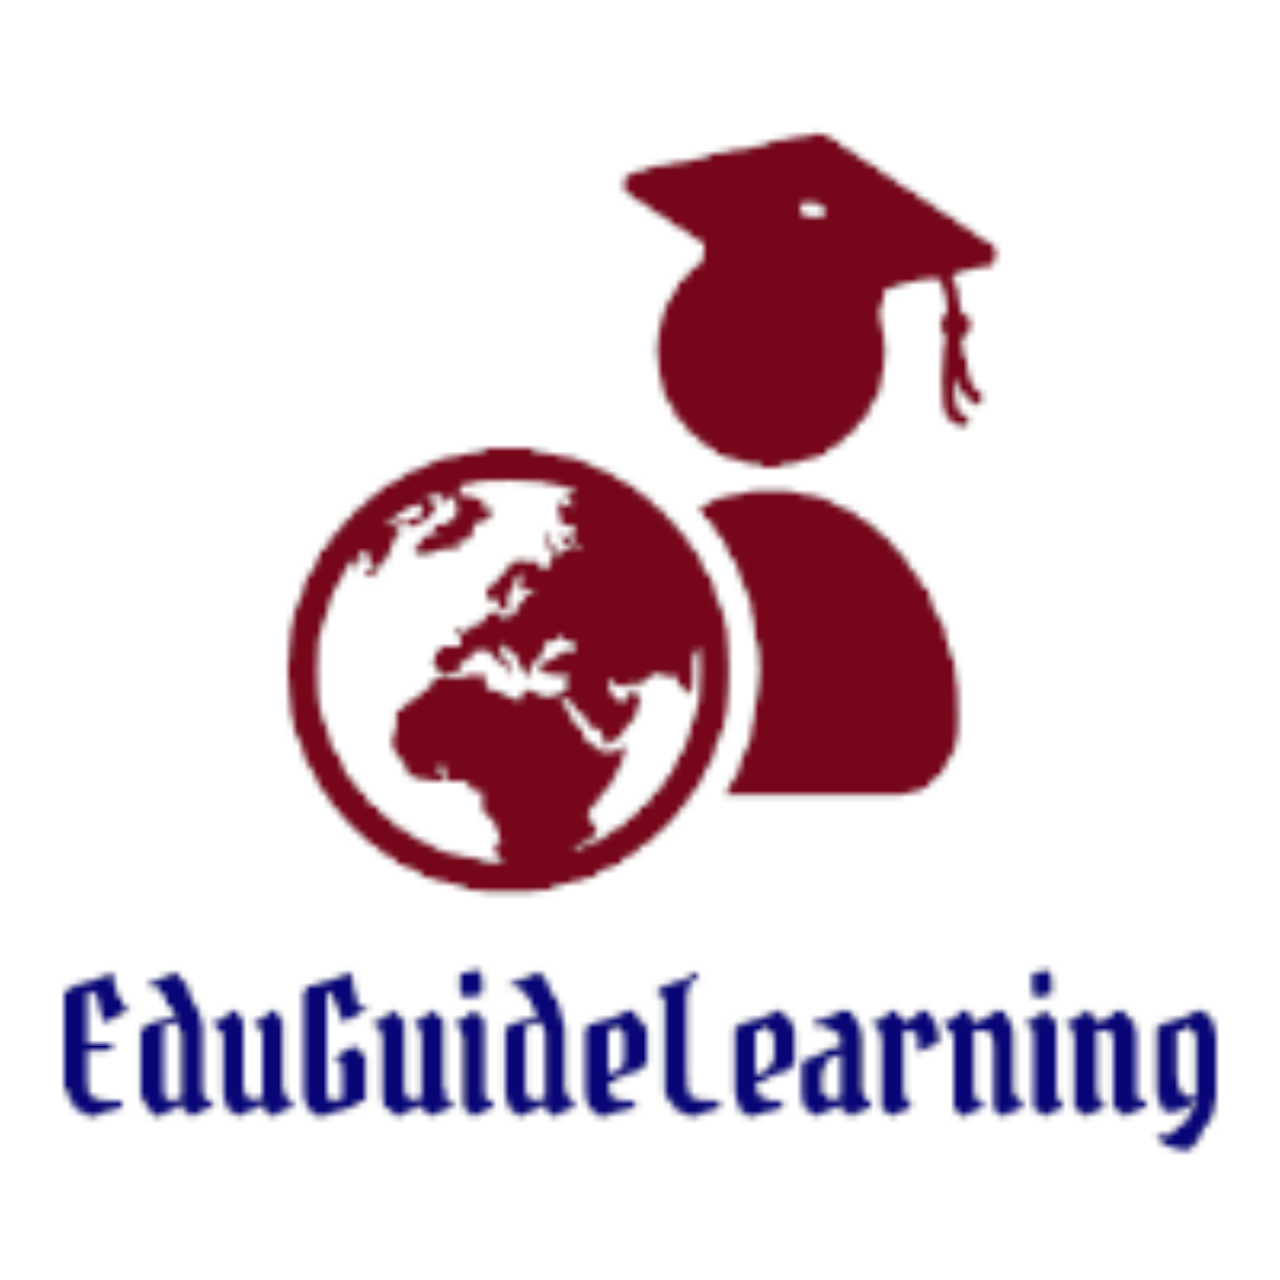 EduGuideLearning || Best questions & answers for board pattern.